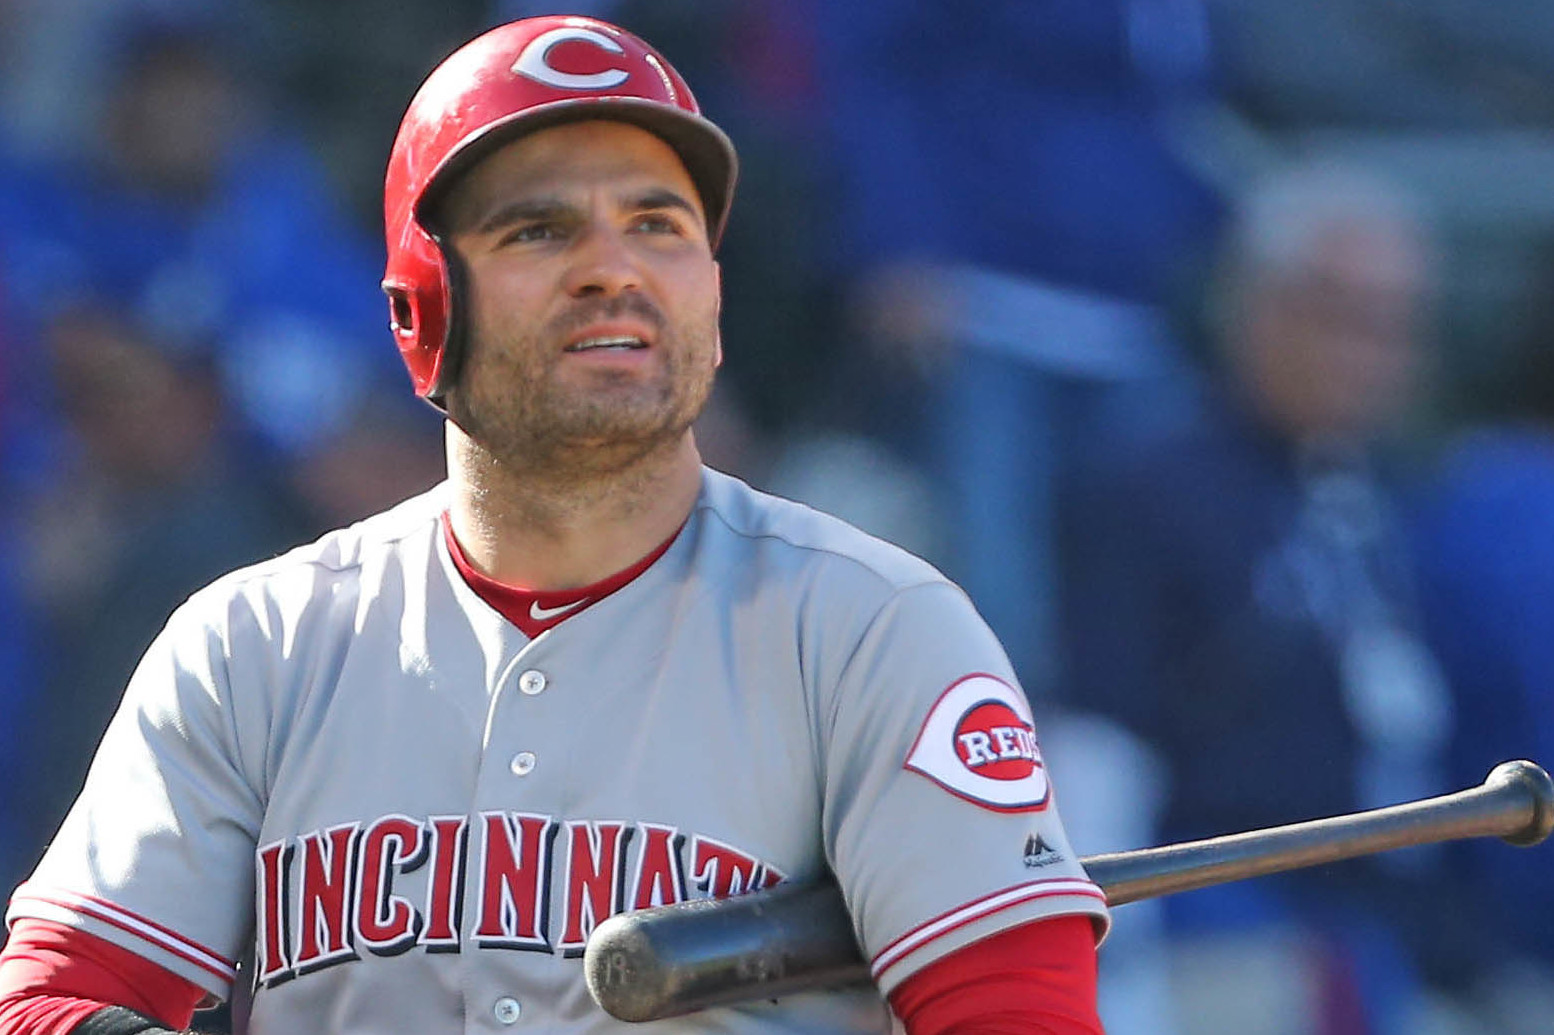 Joey Votto gives incredible mic'd up interview during Reds' season opener -  Sports Illustrated